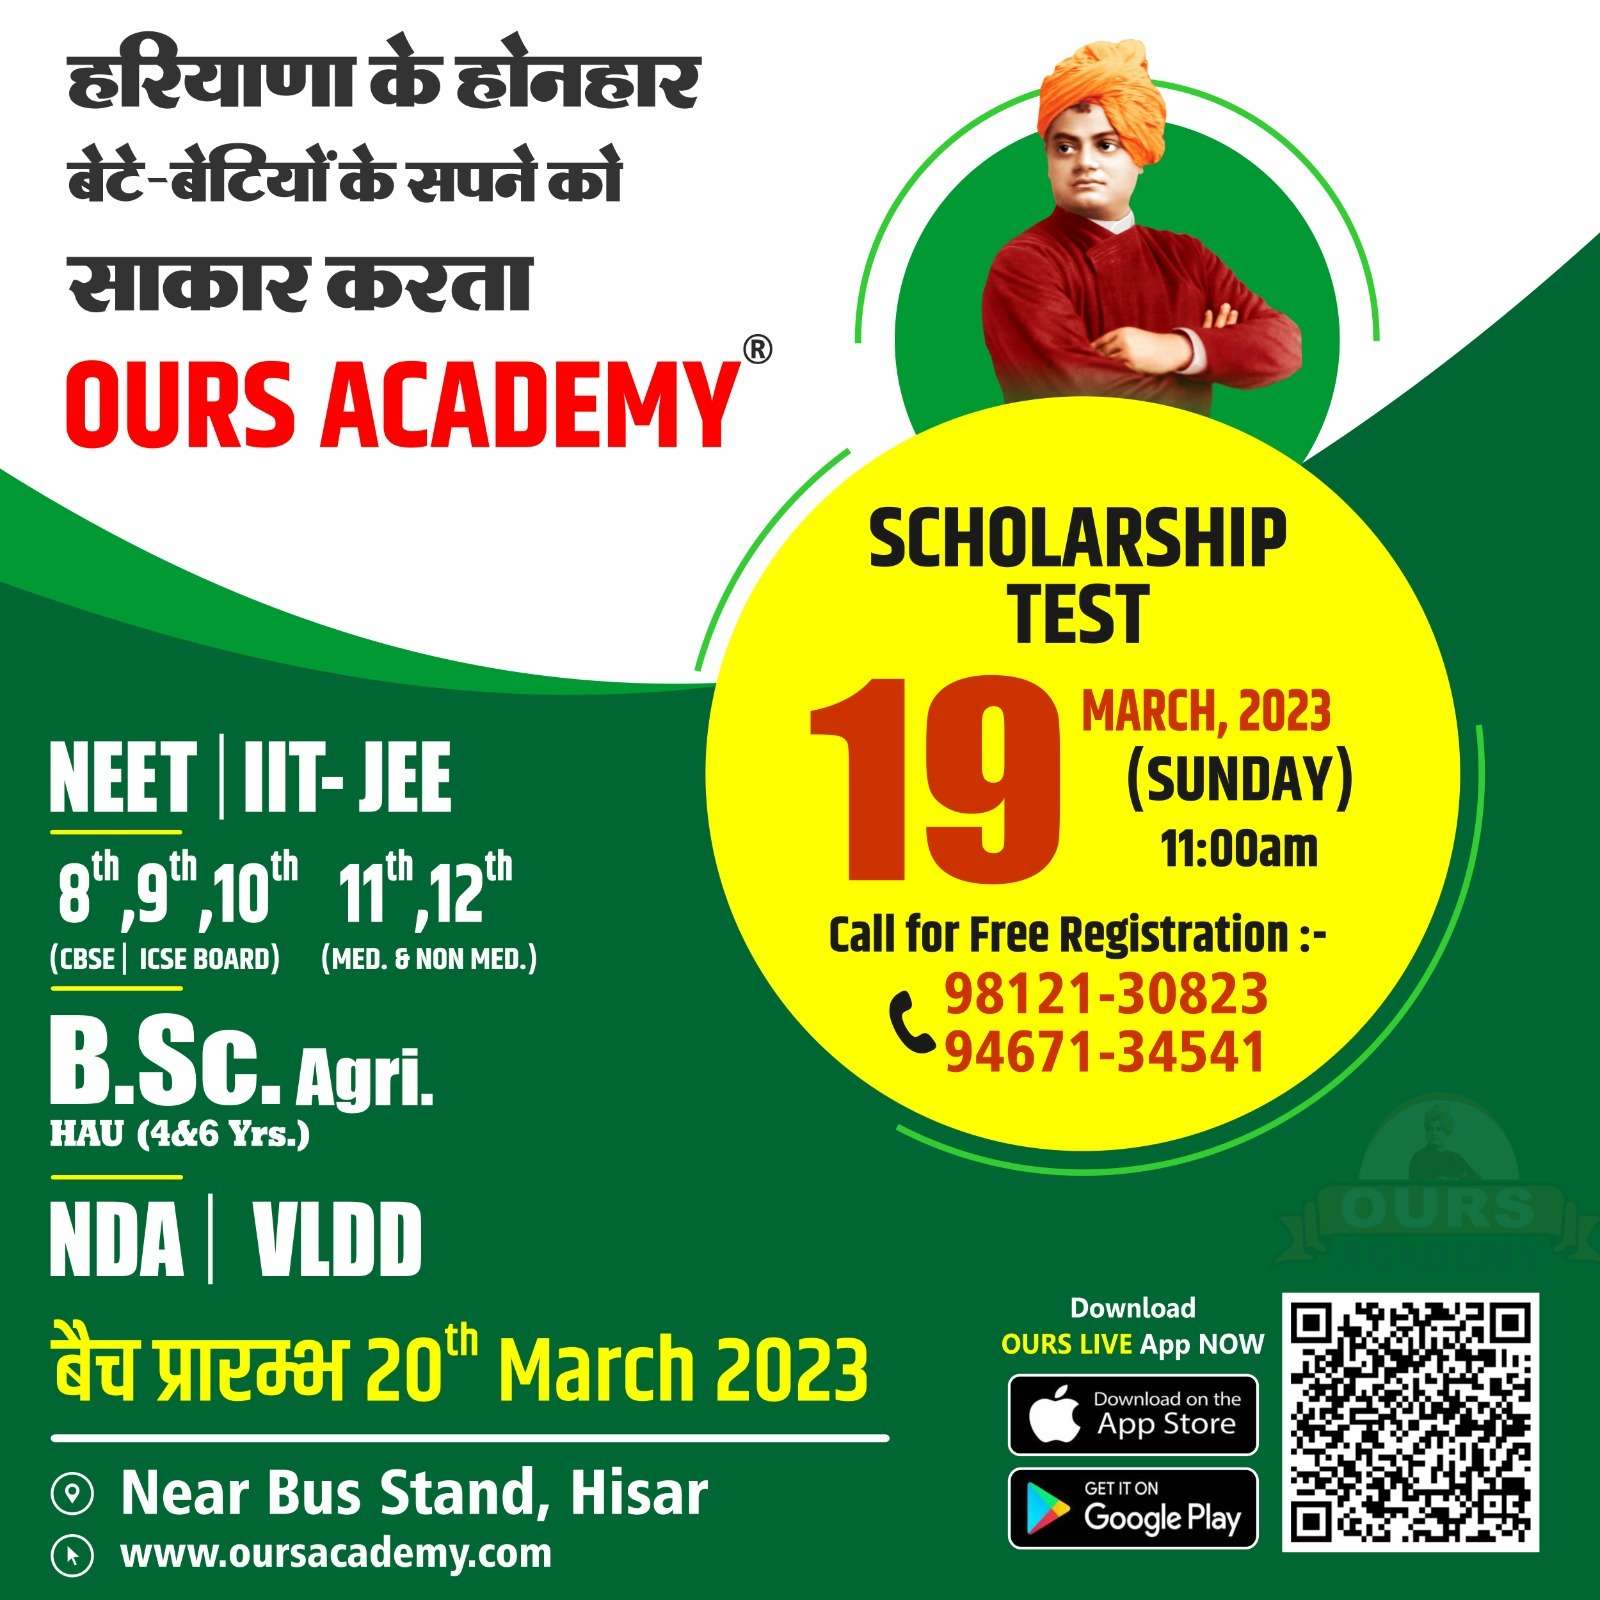 It's time for the scholarship examination at The Best Academy in Hisar.